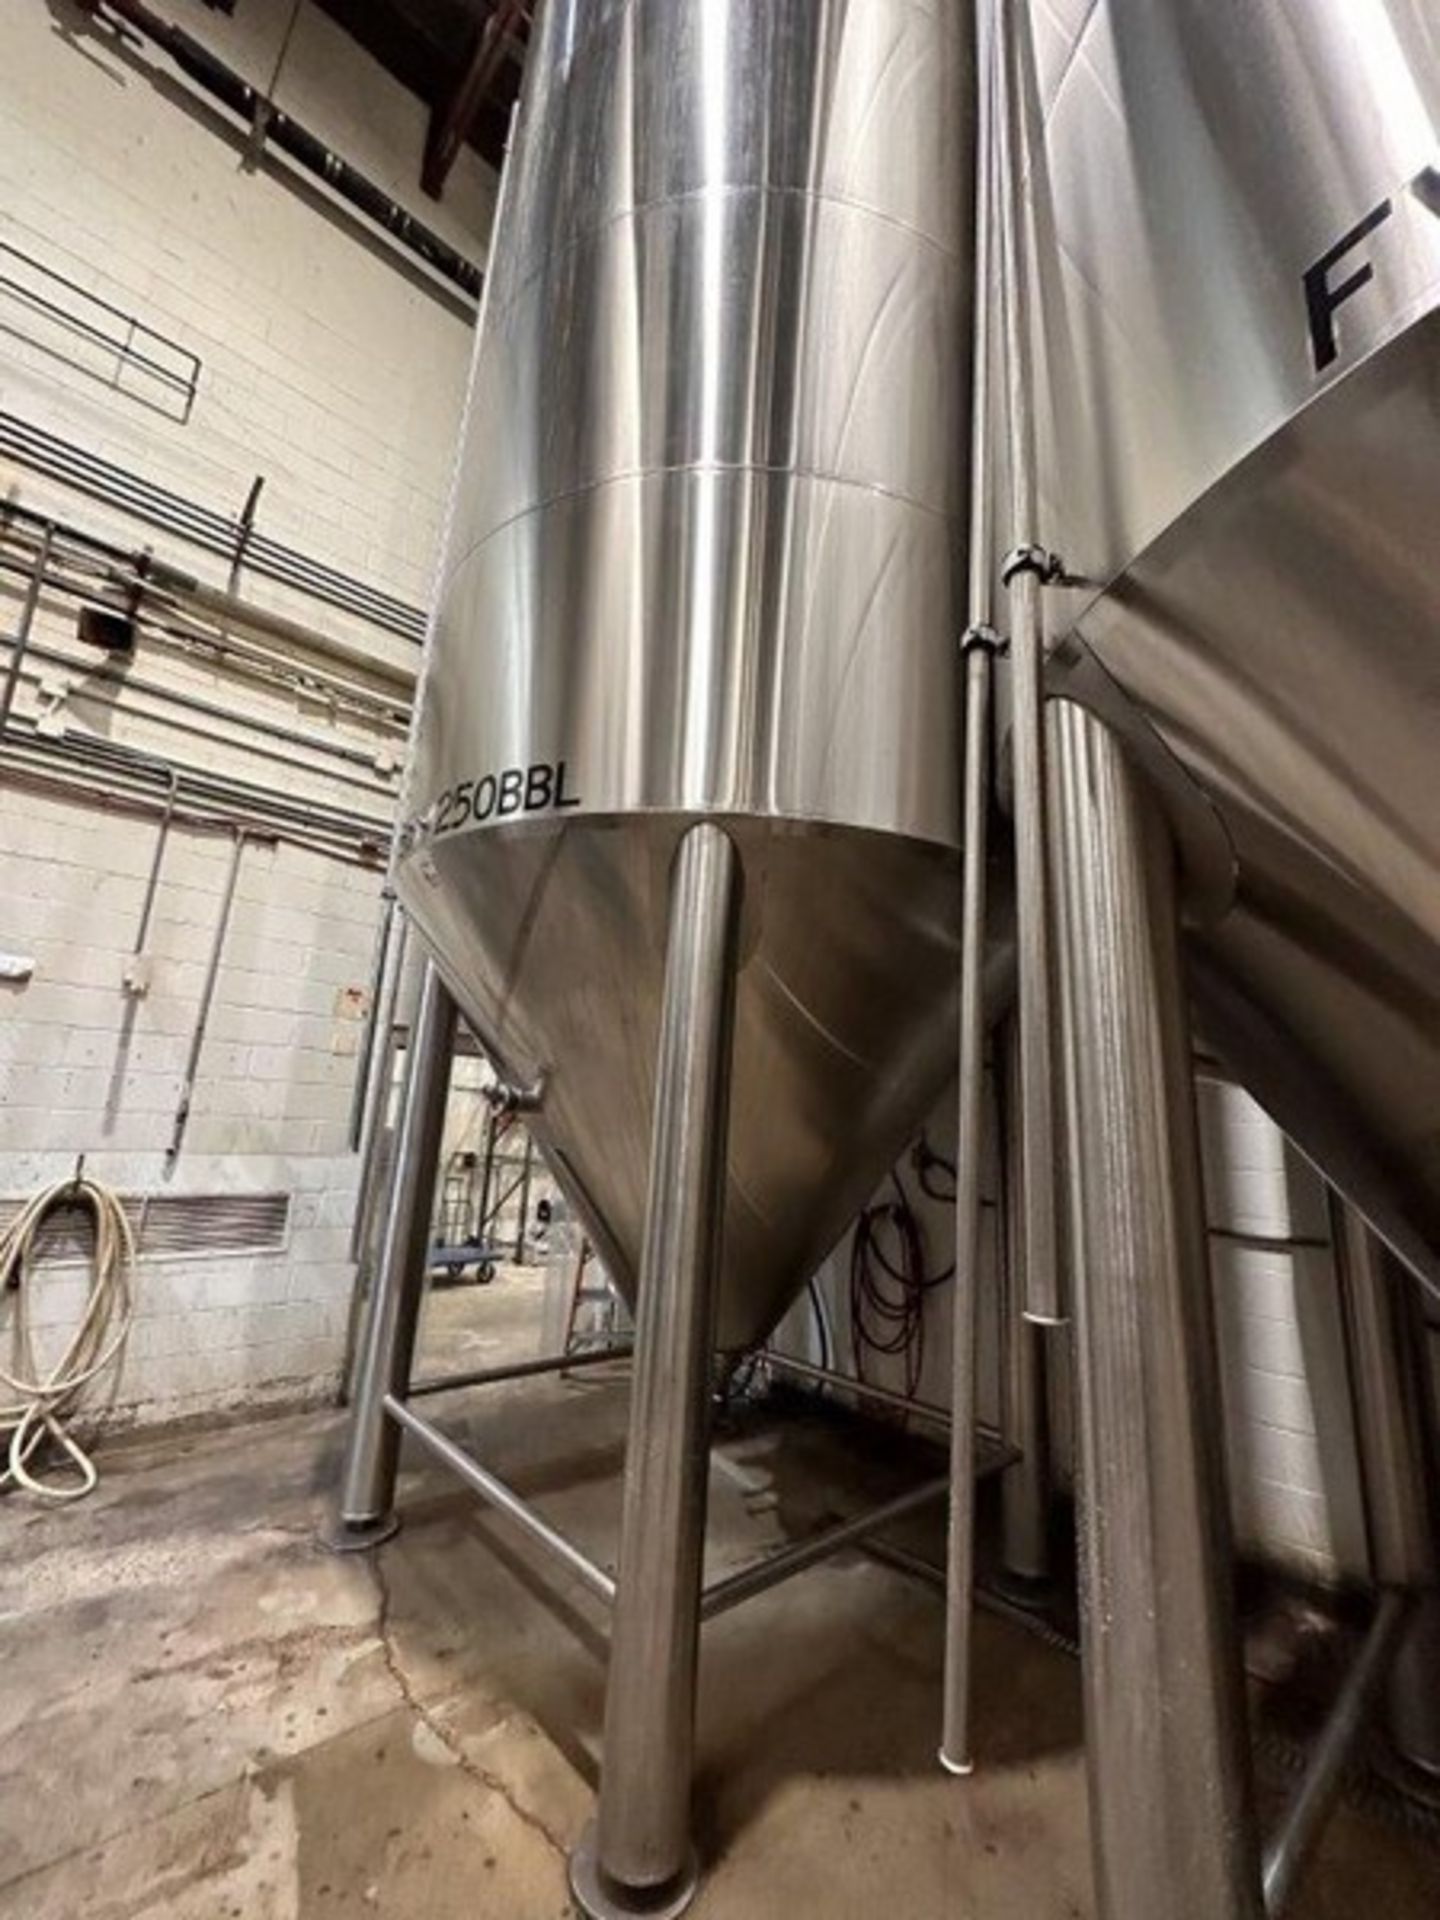 250 BBL (10178 Gallon) Vertical Cone Bottom 304 Stainless Steel Jacketed Vessel. Manufactured by JV - Image 2 of 8